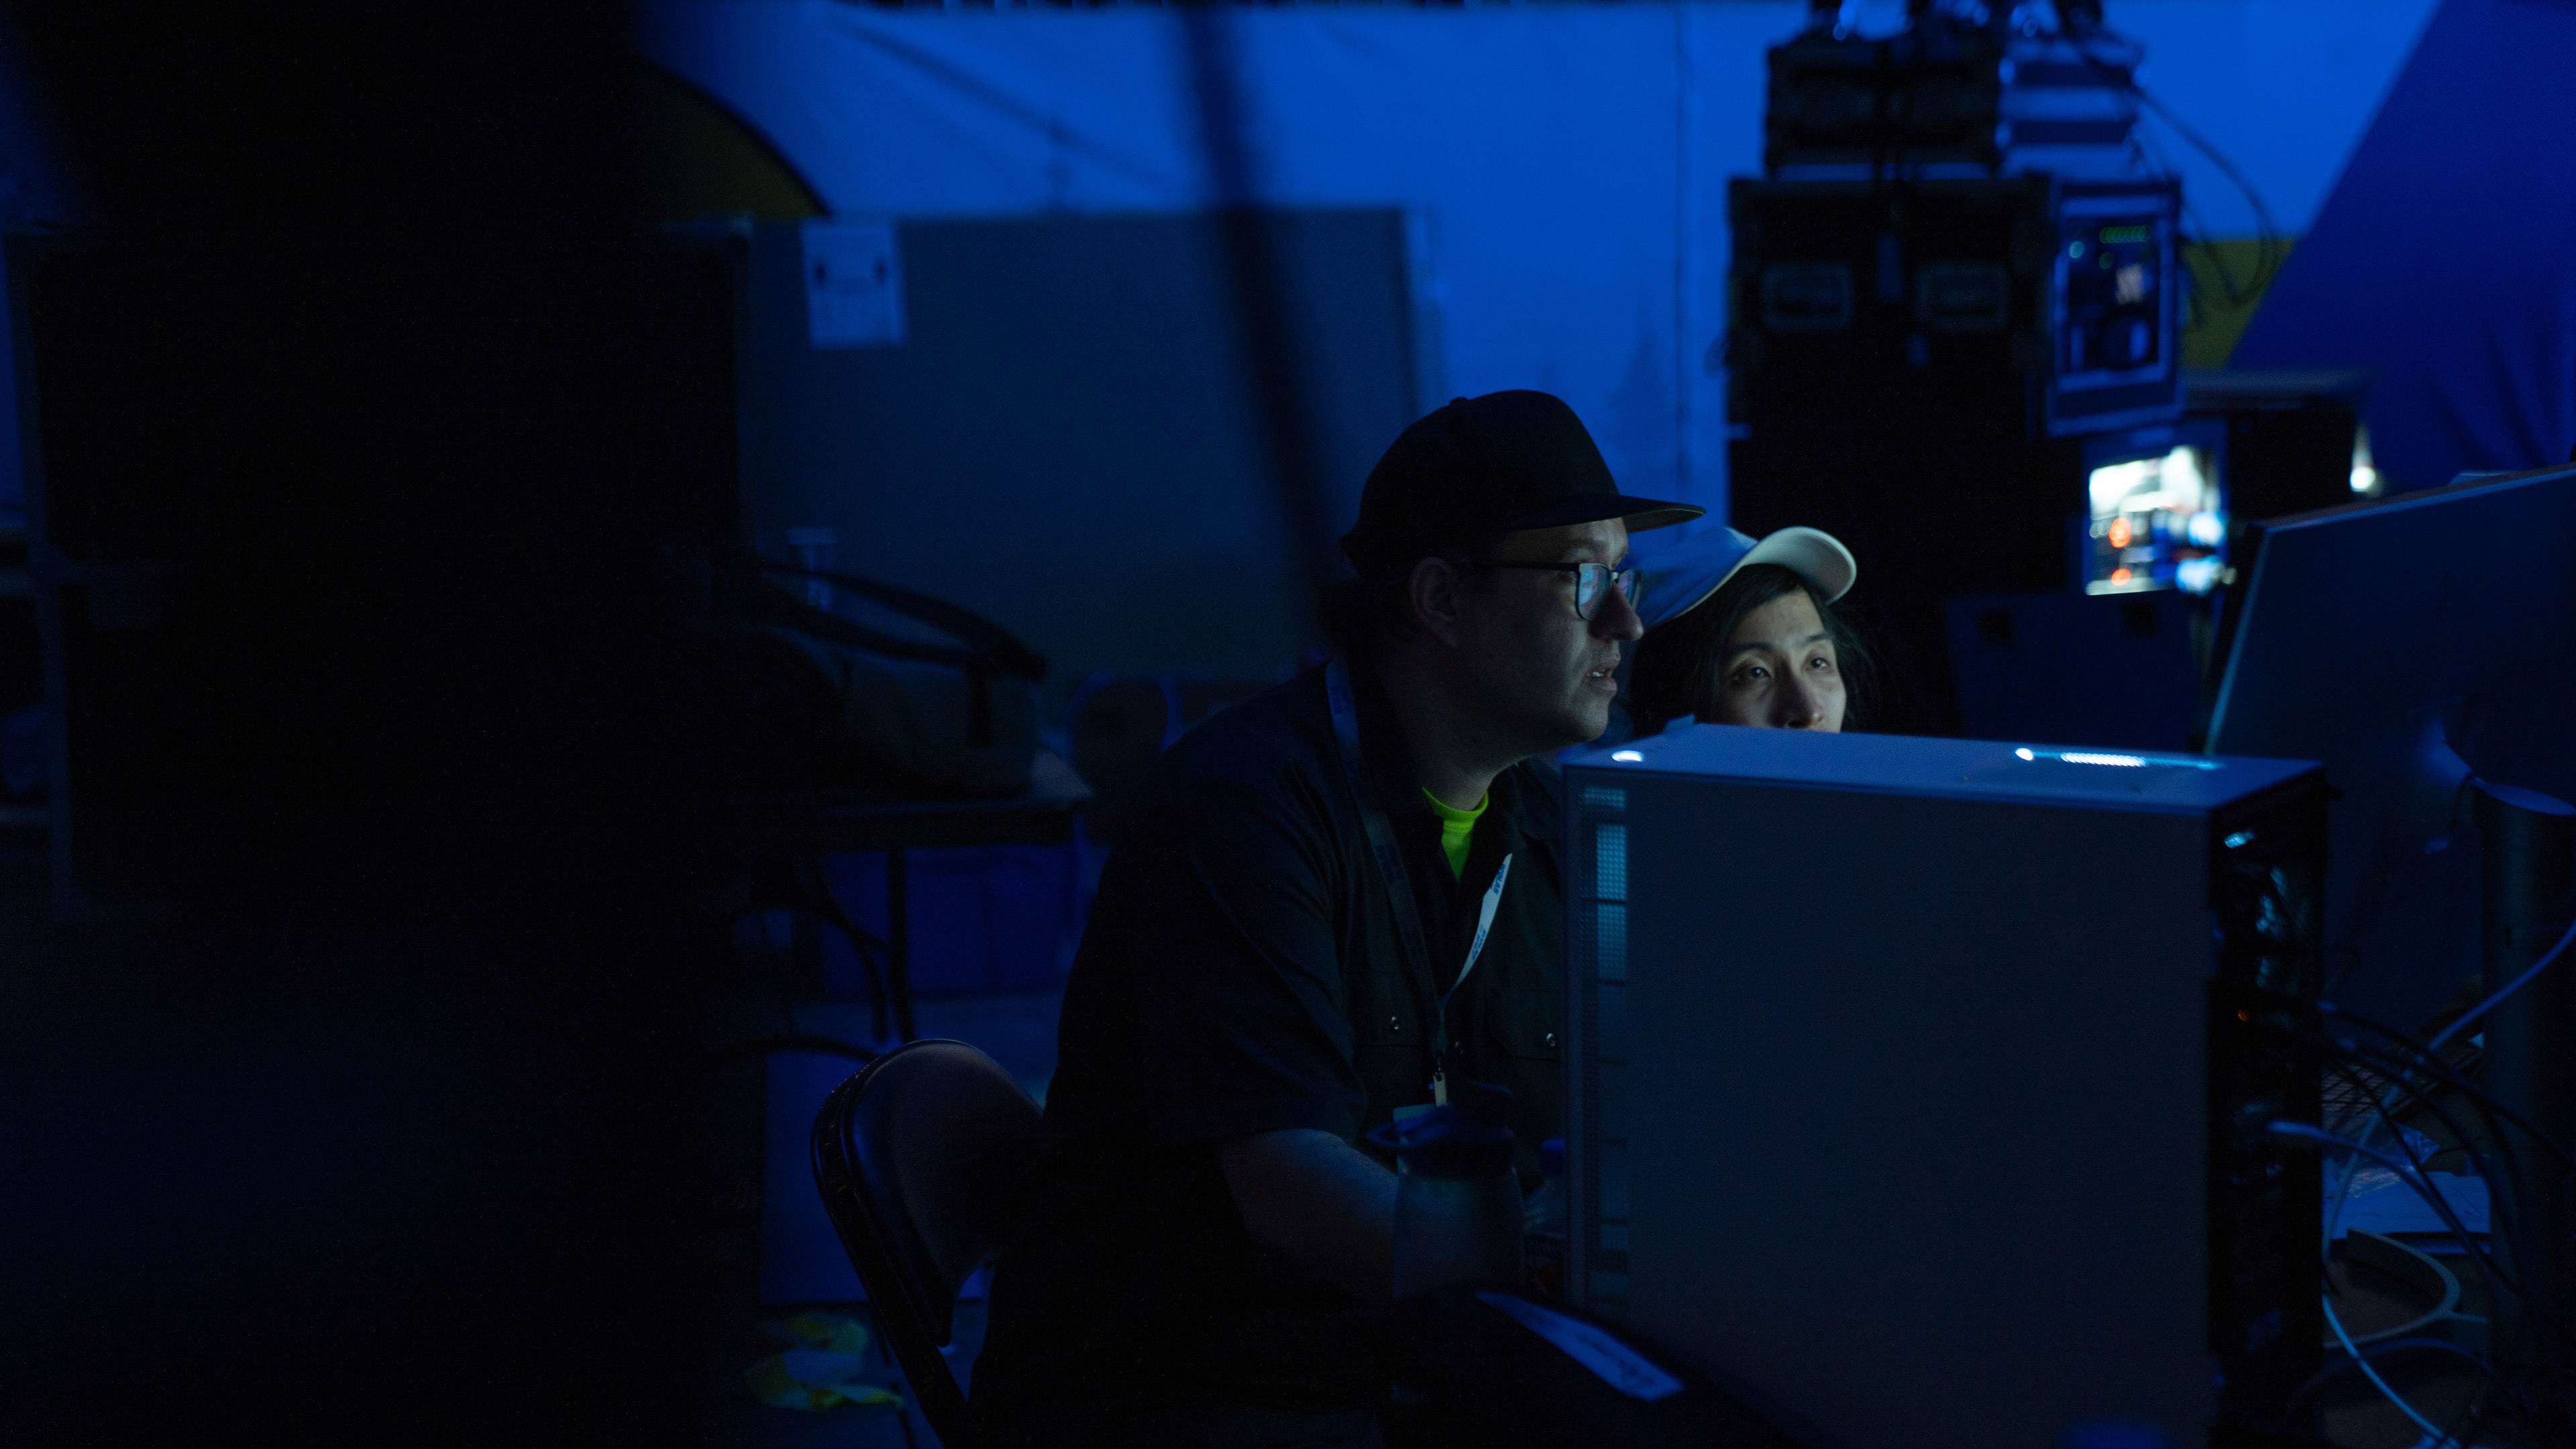 Two developers wearing hats sit and work on computers together, lit by very blue lights. They look like cool dudes